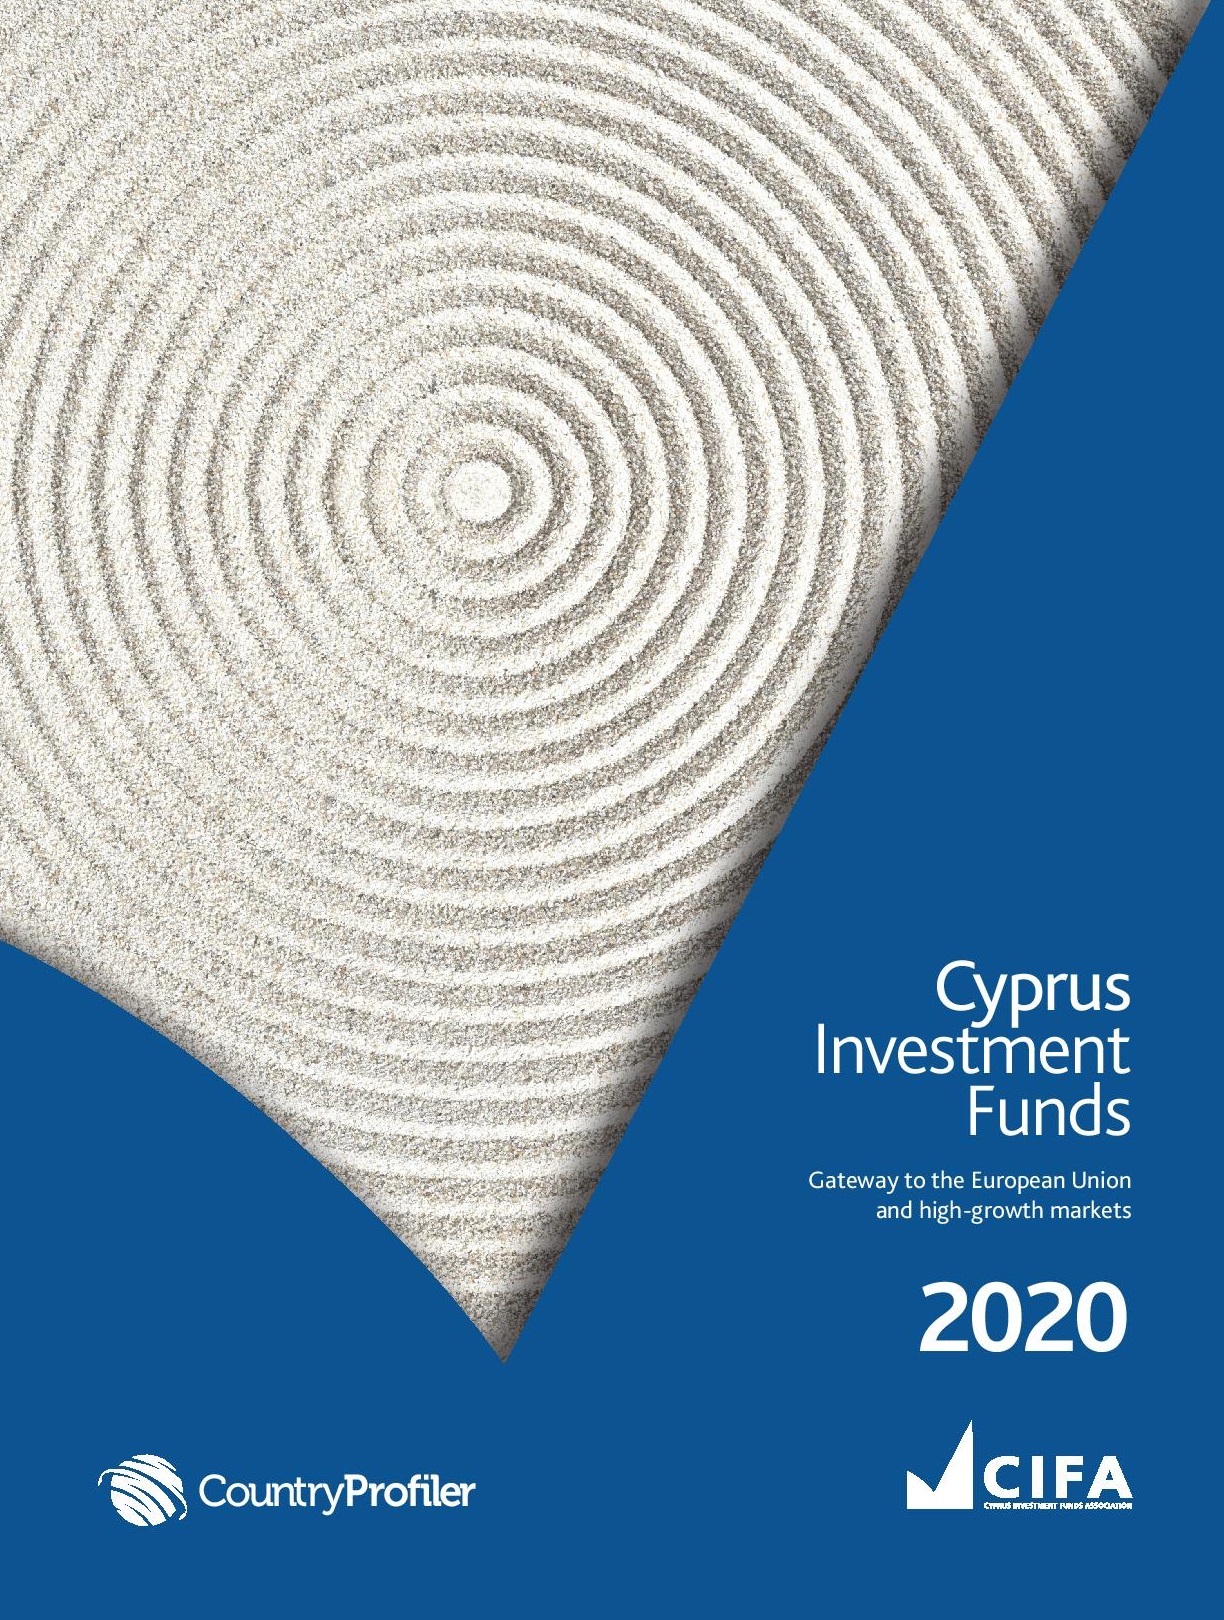 CIFA Investment Funds Guide 2020